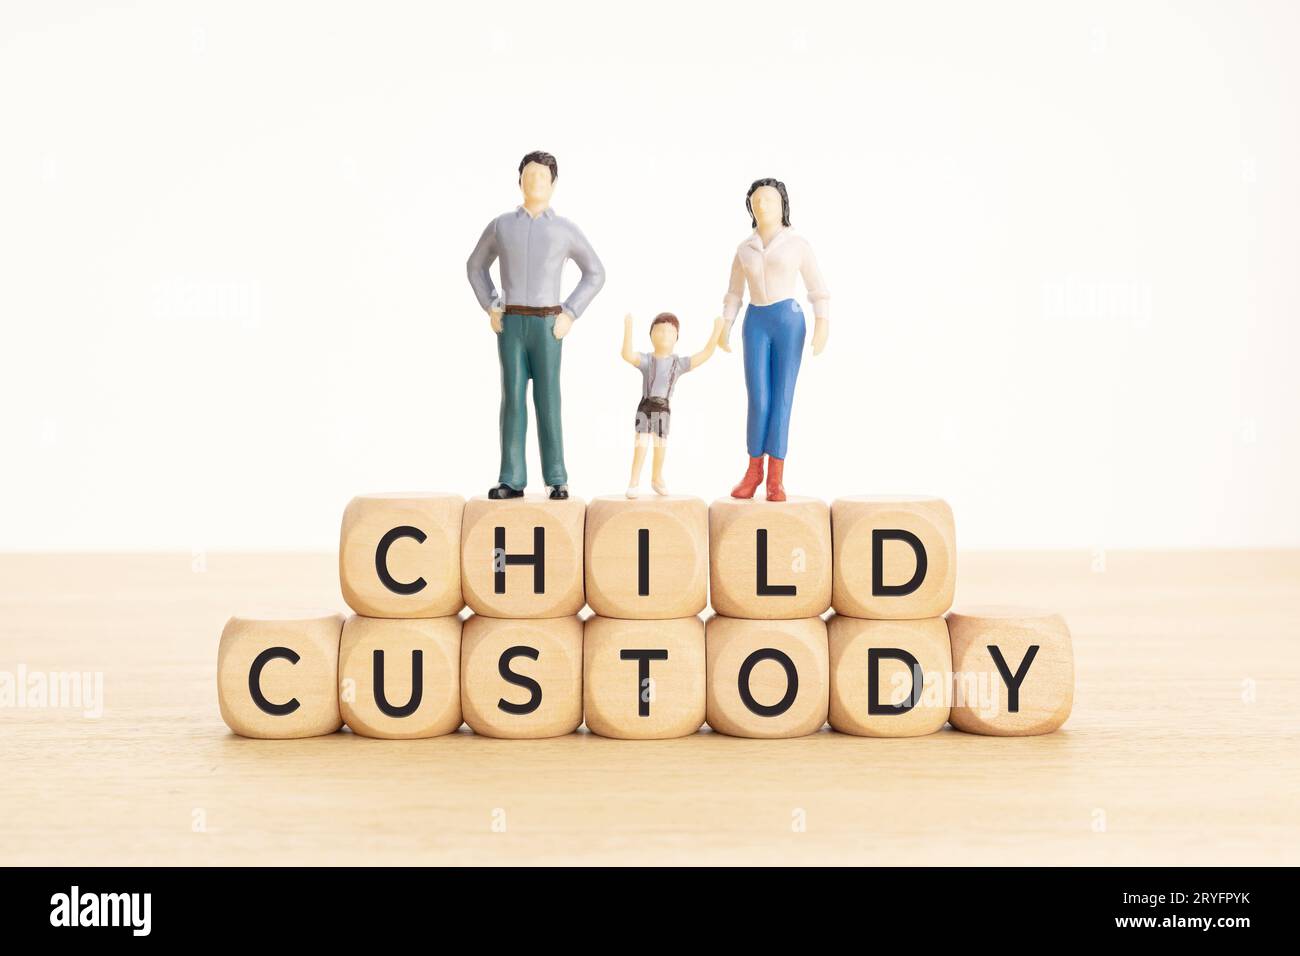 Child custody concept. Wooden blocks with text and woman, man and child figurine Stock Photo